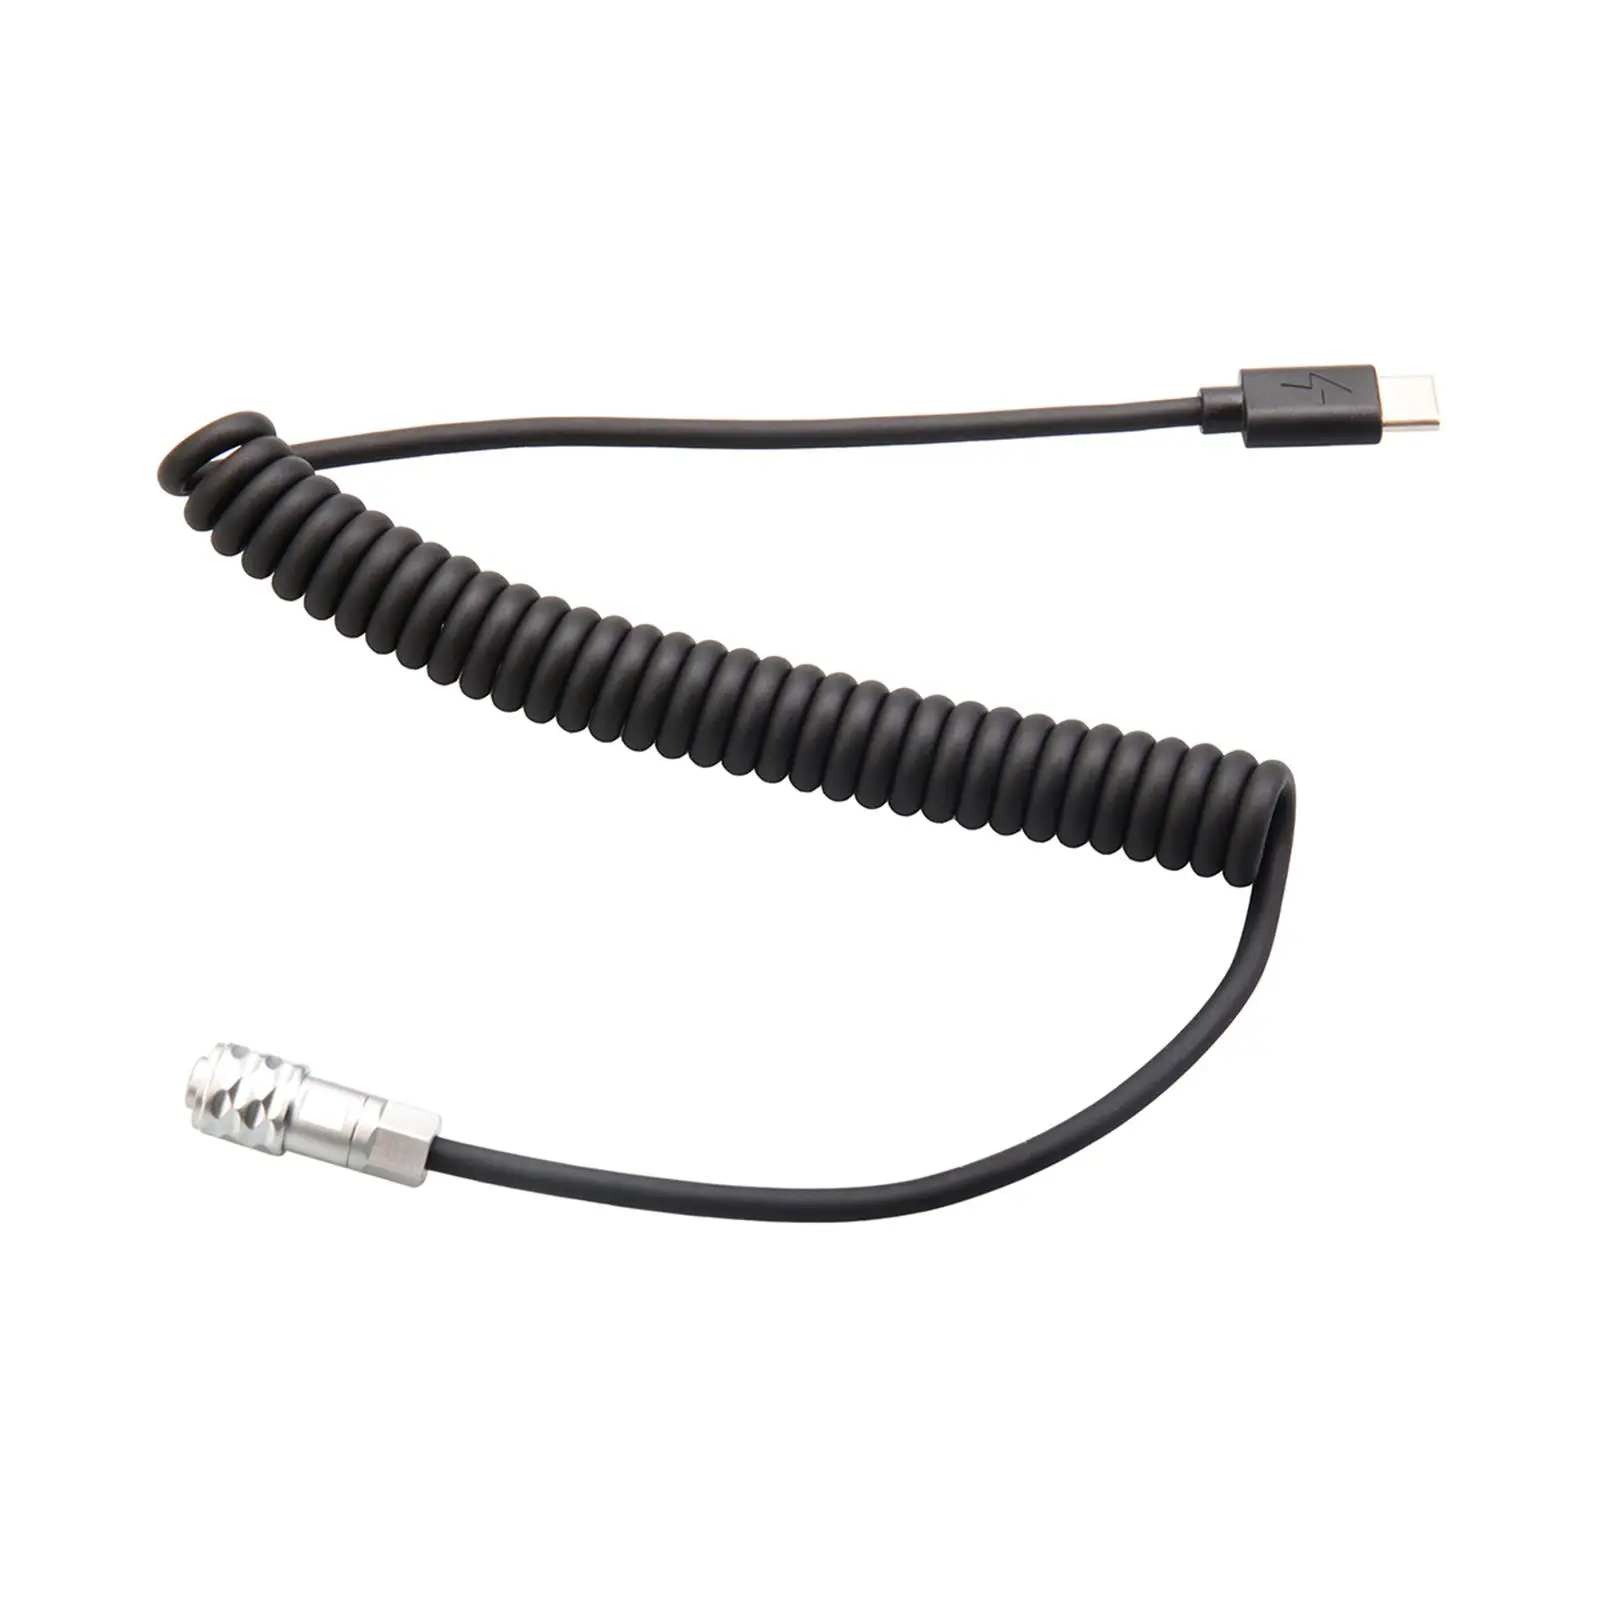  PD , 2Pin to usb Stretchable Camera Battery Power Cable for Bmpcc 4K 6 Devices, Live , Power Cable, Black